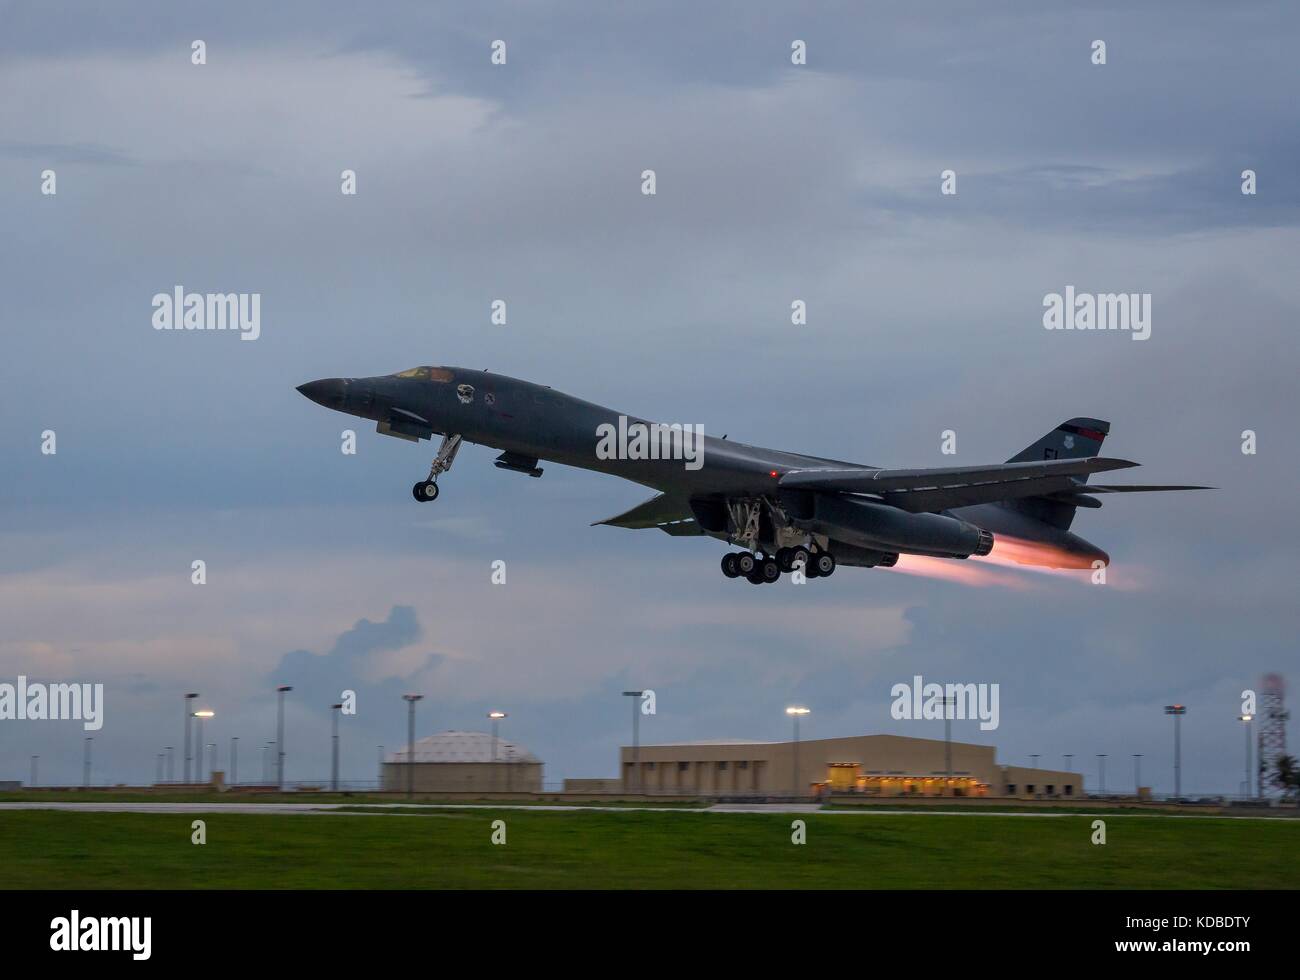 A U.S. Air Force B-1B Lancer bomber with the 37th Expeditionary Bomb Squadron takes off to join the Japan Air Self-Defense Force and South Korean Air Force in a joint night operation over the Sea of Japan October 10, 2017 in Guam. The mission marks the first time U.S. Pacific Command B-1B Lancers have conducted combined training with JASDF and ROKAF fighters at night. Stock Photo